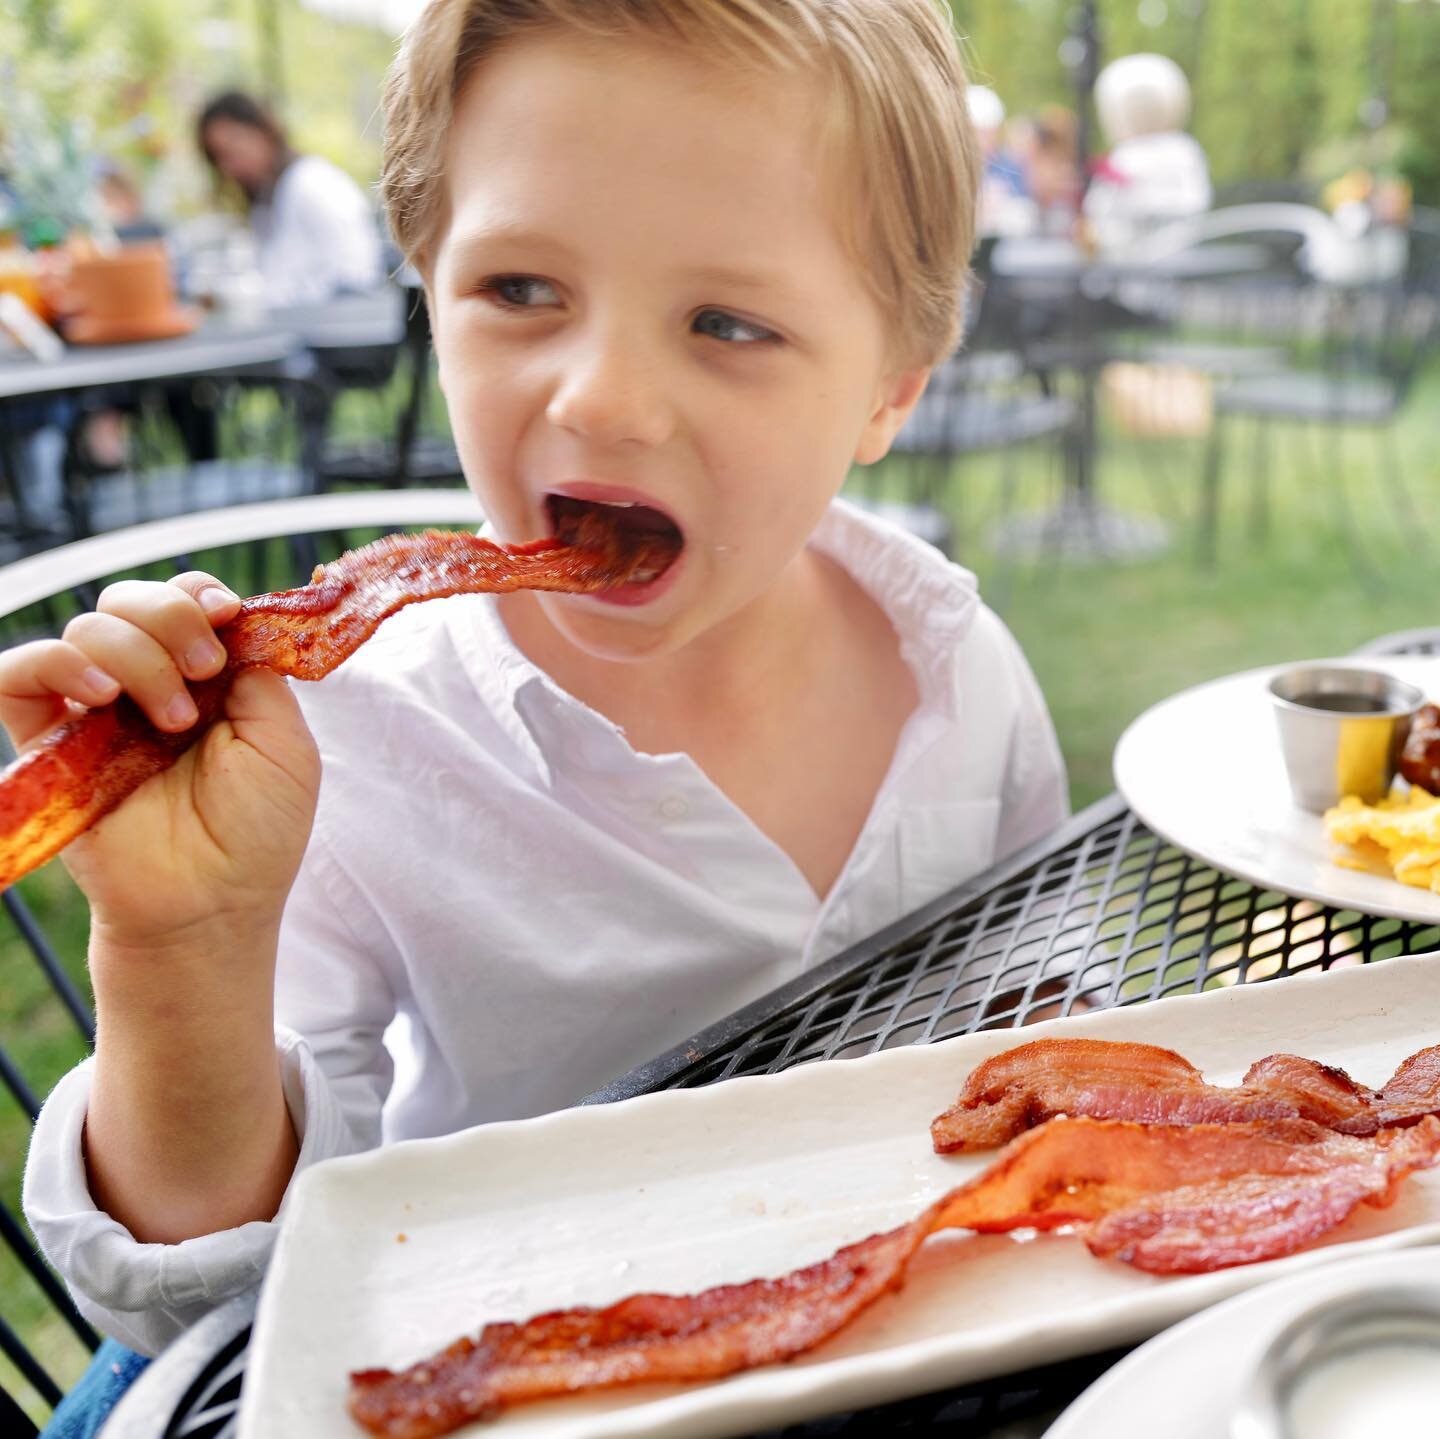 Did Somebody Say Bacon?🥓
&nbsp; ⠀⠀⠀⠀⠀⠀⠀⠀⠀⠀⠀⠀
&nbsp; ⠀⠀⠀⠀⠀⠀⠀⠀⠀⠀⠀⠀
To me, Sundays mean brunch. It&rsquo;s my favorite meal of the week. Nothing is better than warm eggs Benedict, avocado toast, a stack of fancy pancakes, and a mimosa.....or two or thr